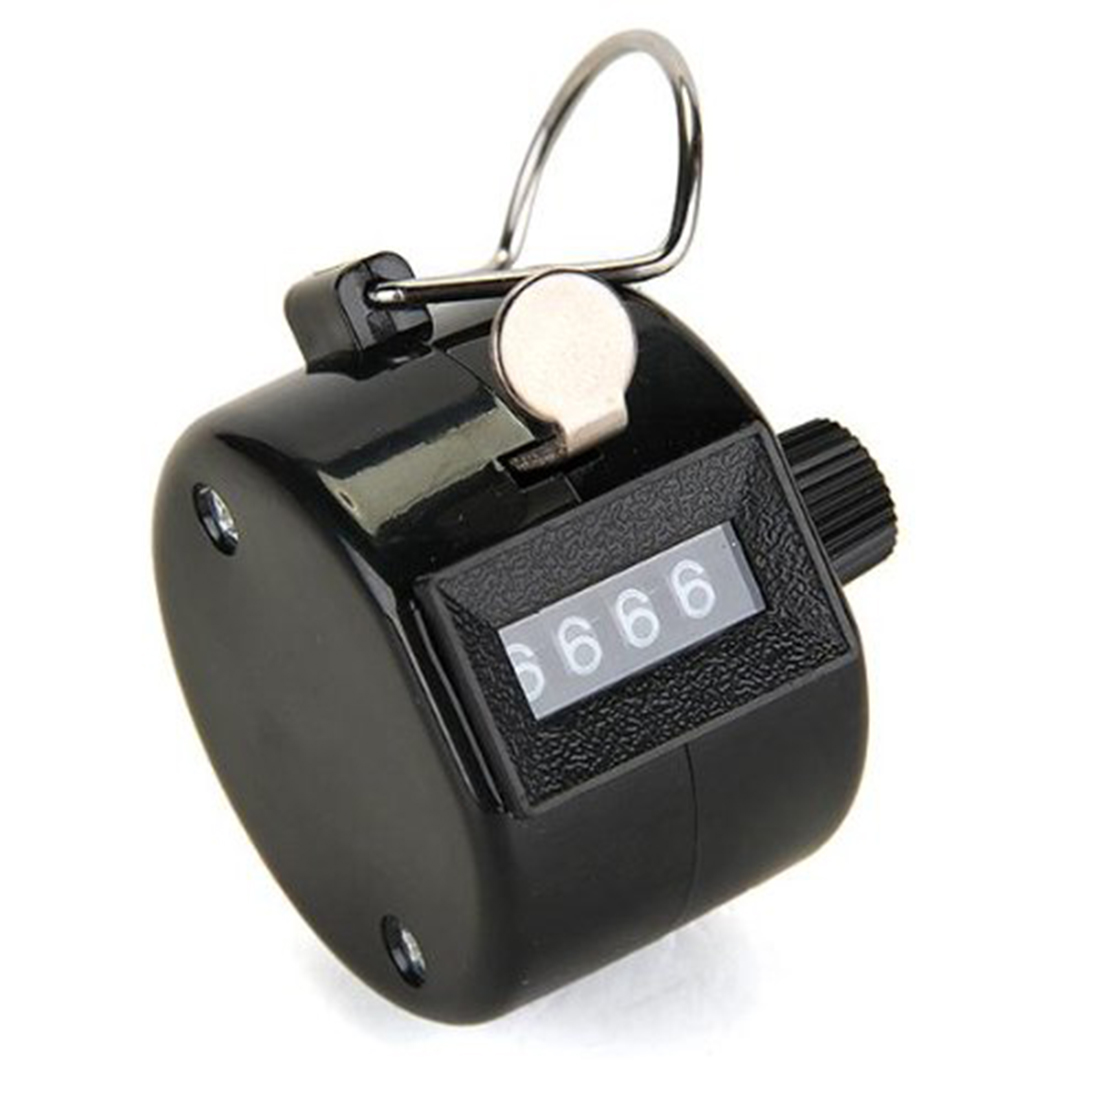 Hand Tally Counter 4 Digital Display Mechanical Manual Count Click with Finger 